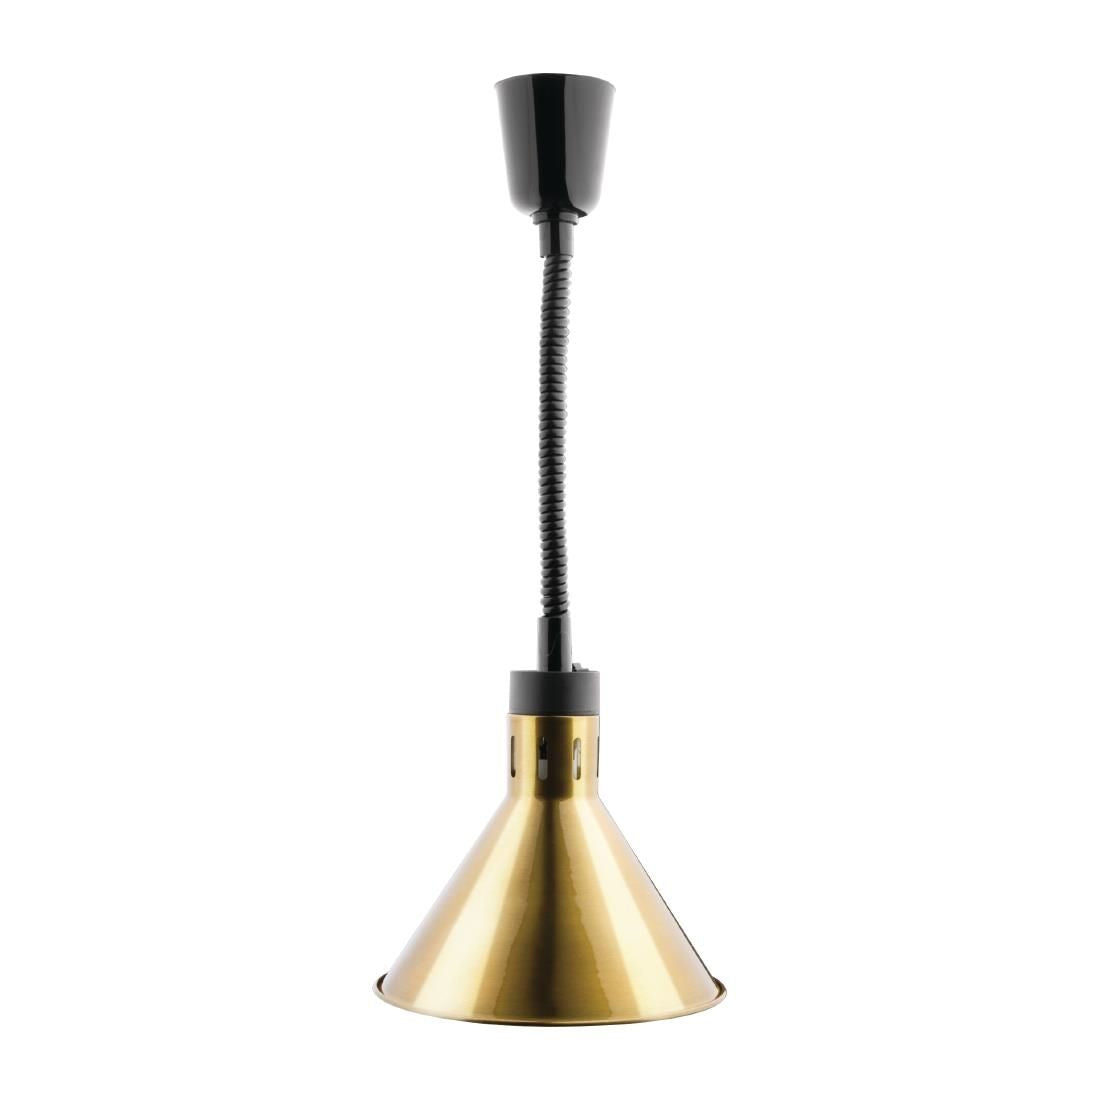 DY465 Buffalo Conical Retractable Heat Shade Pale Gold Finish JD Catering Equipment Solutions Ltd